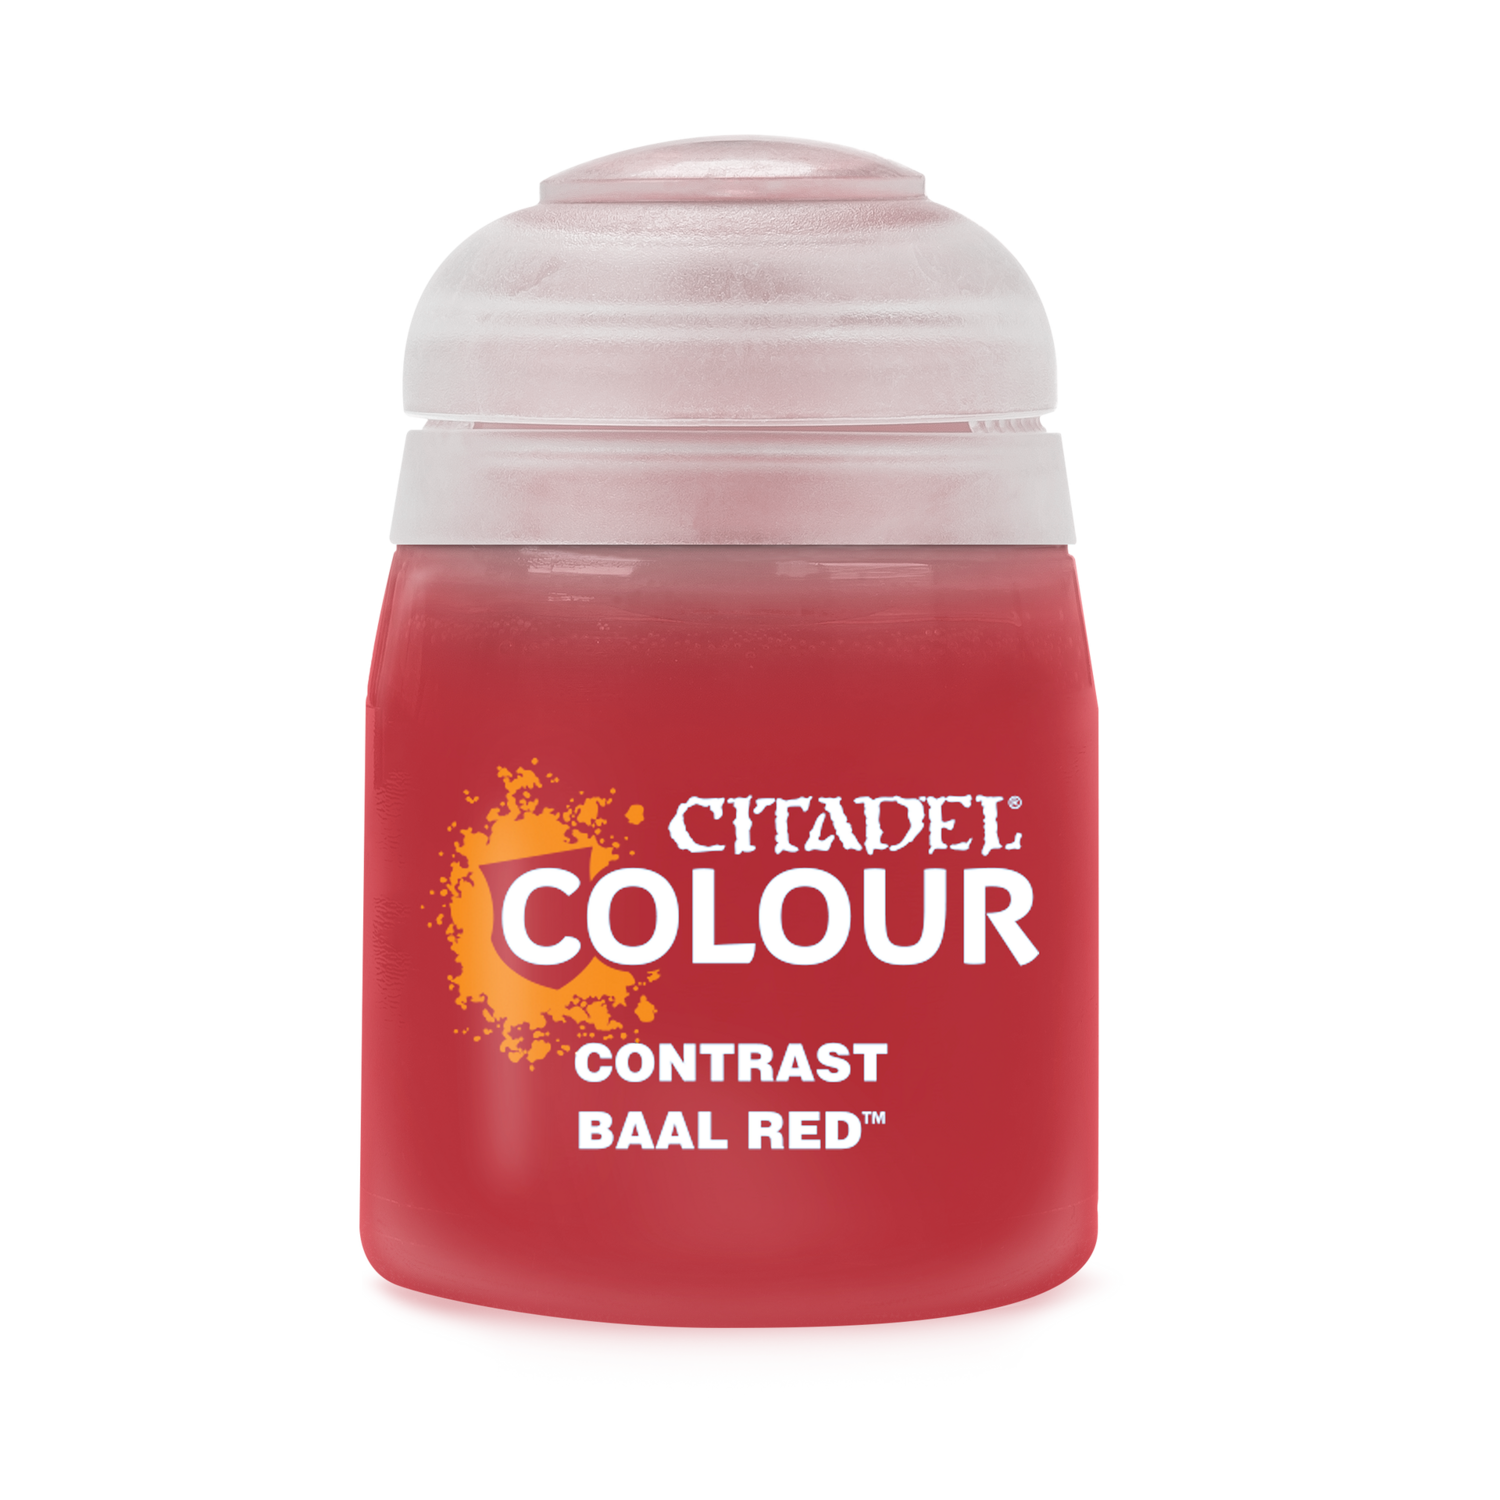 CONTRAST Baal Red